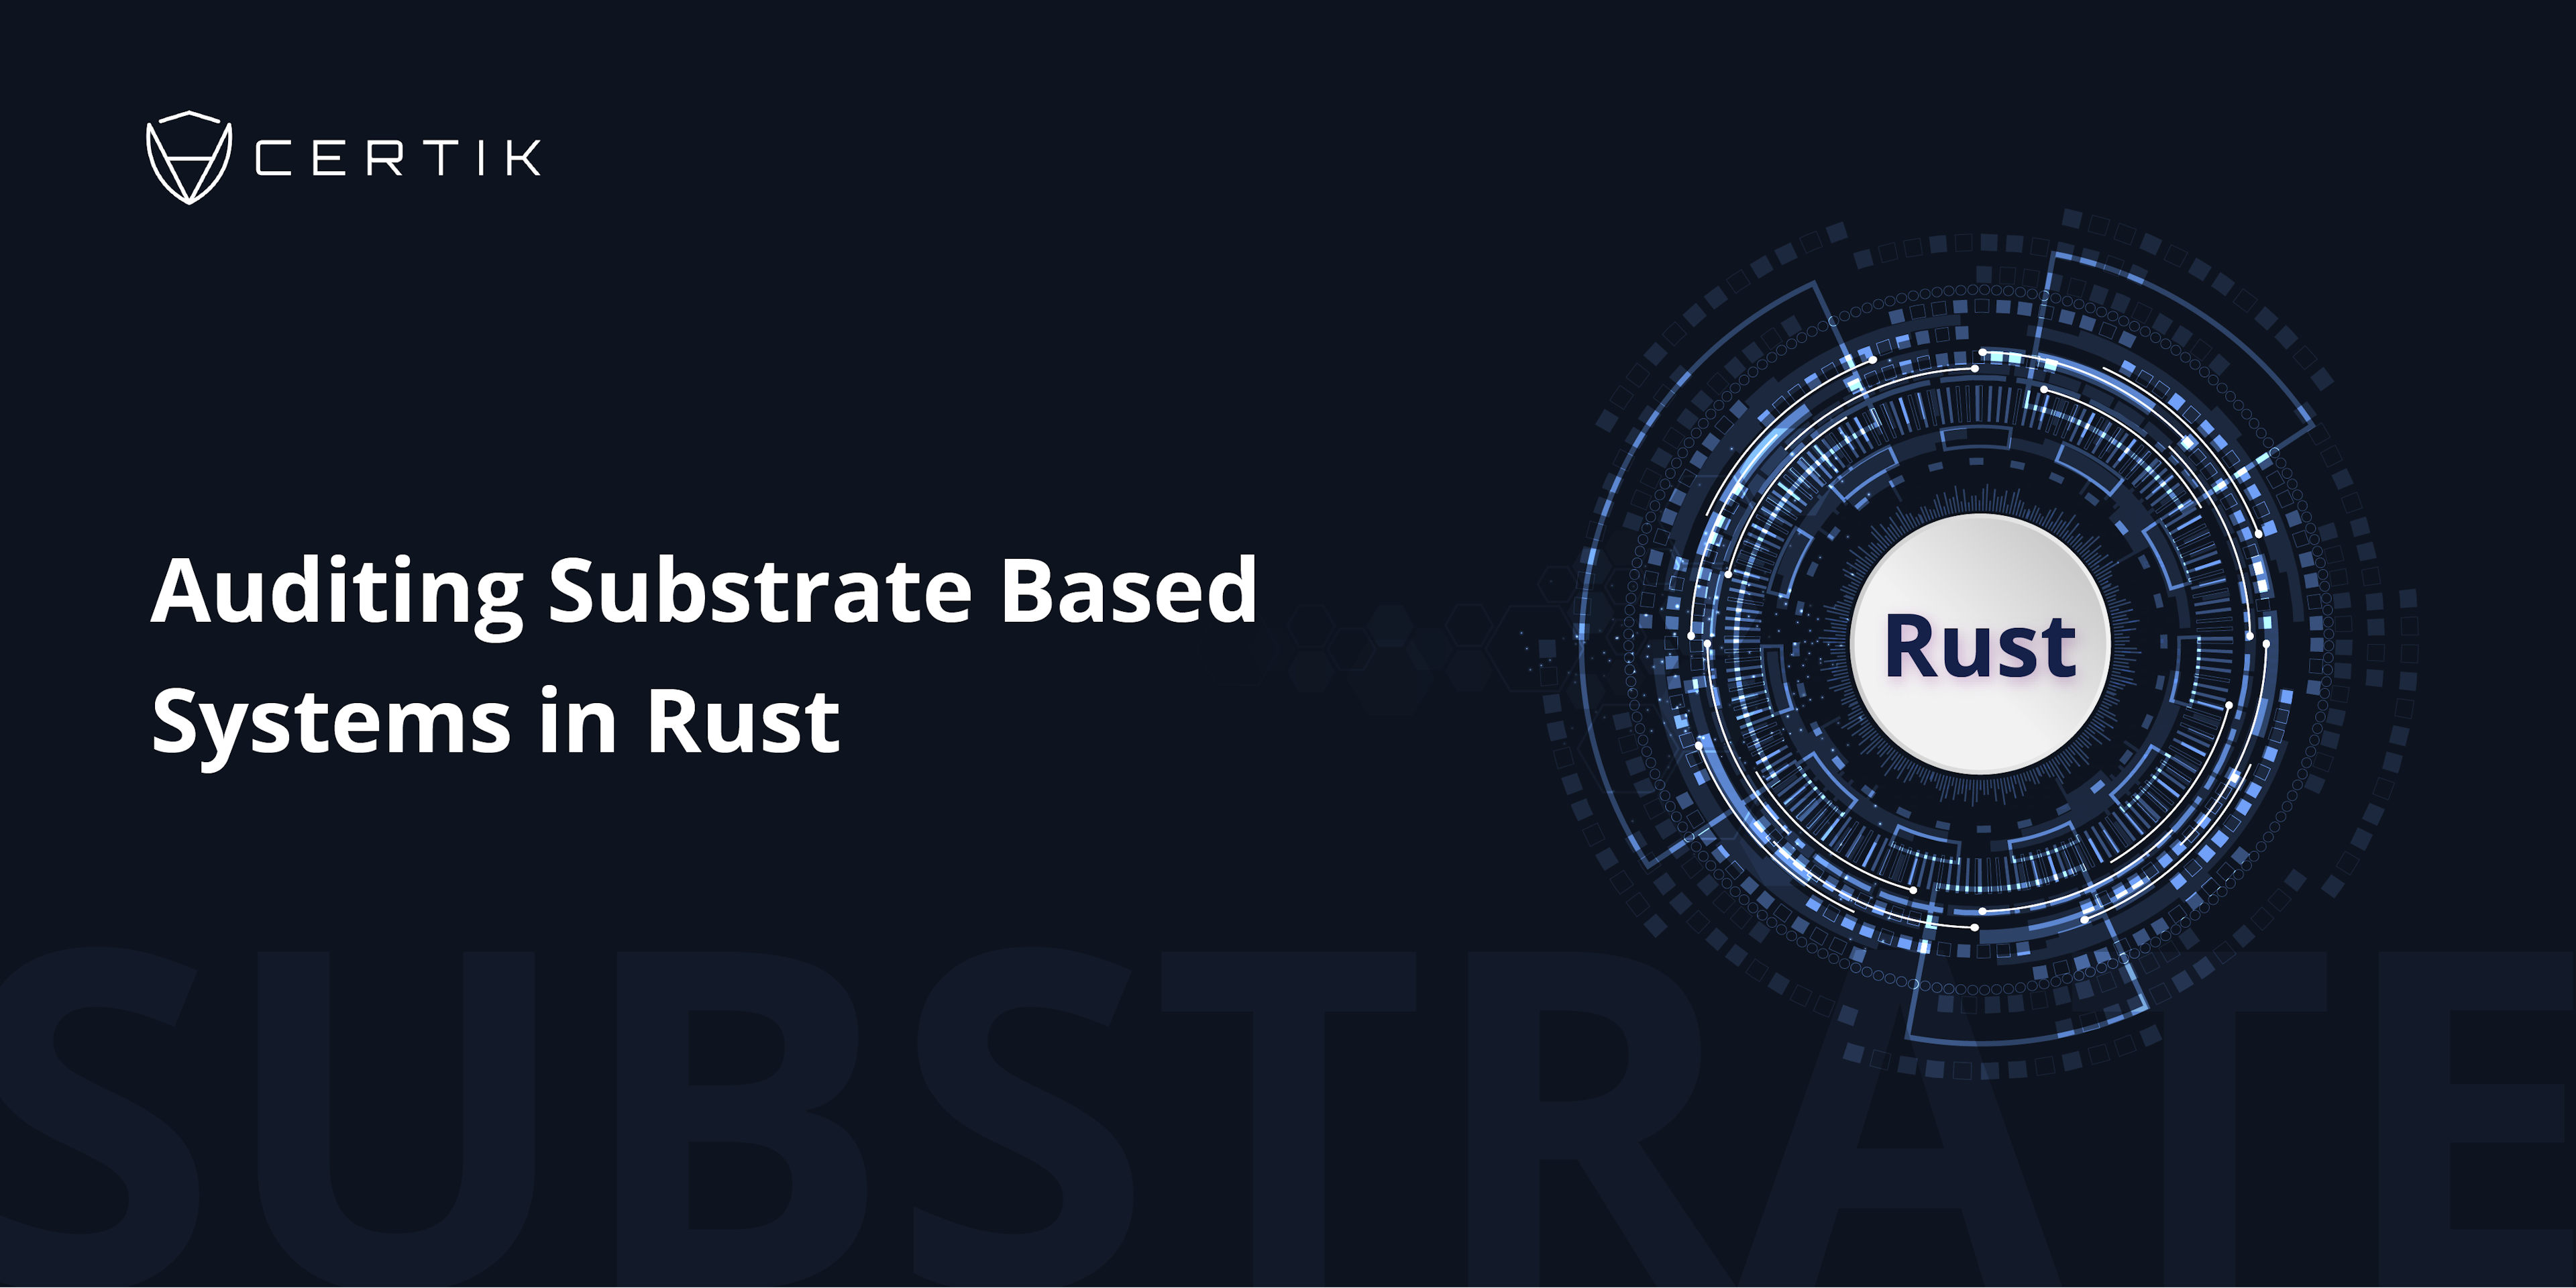 Auditing Substrate Based Systems in Rust